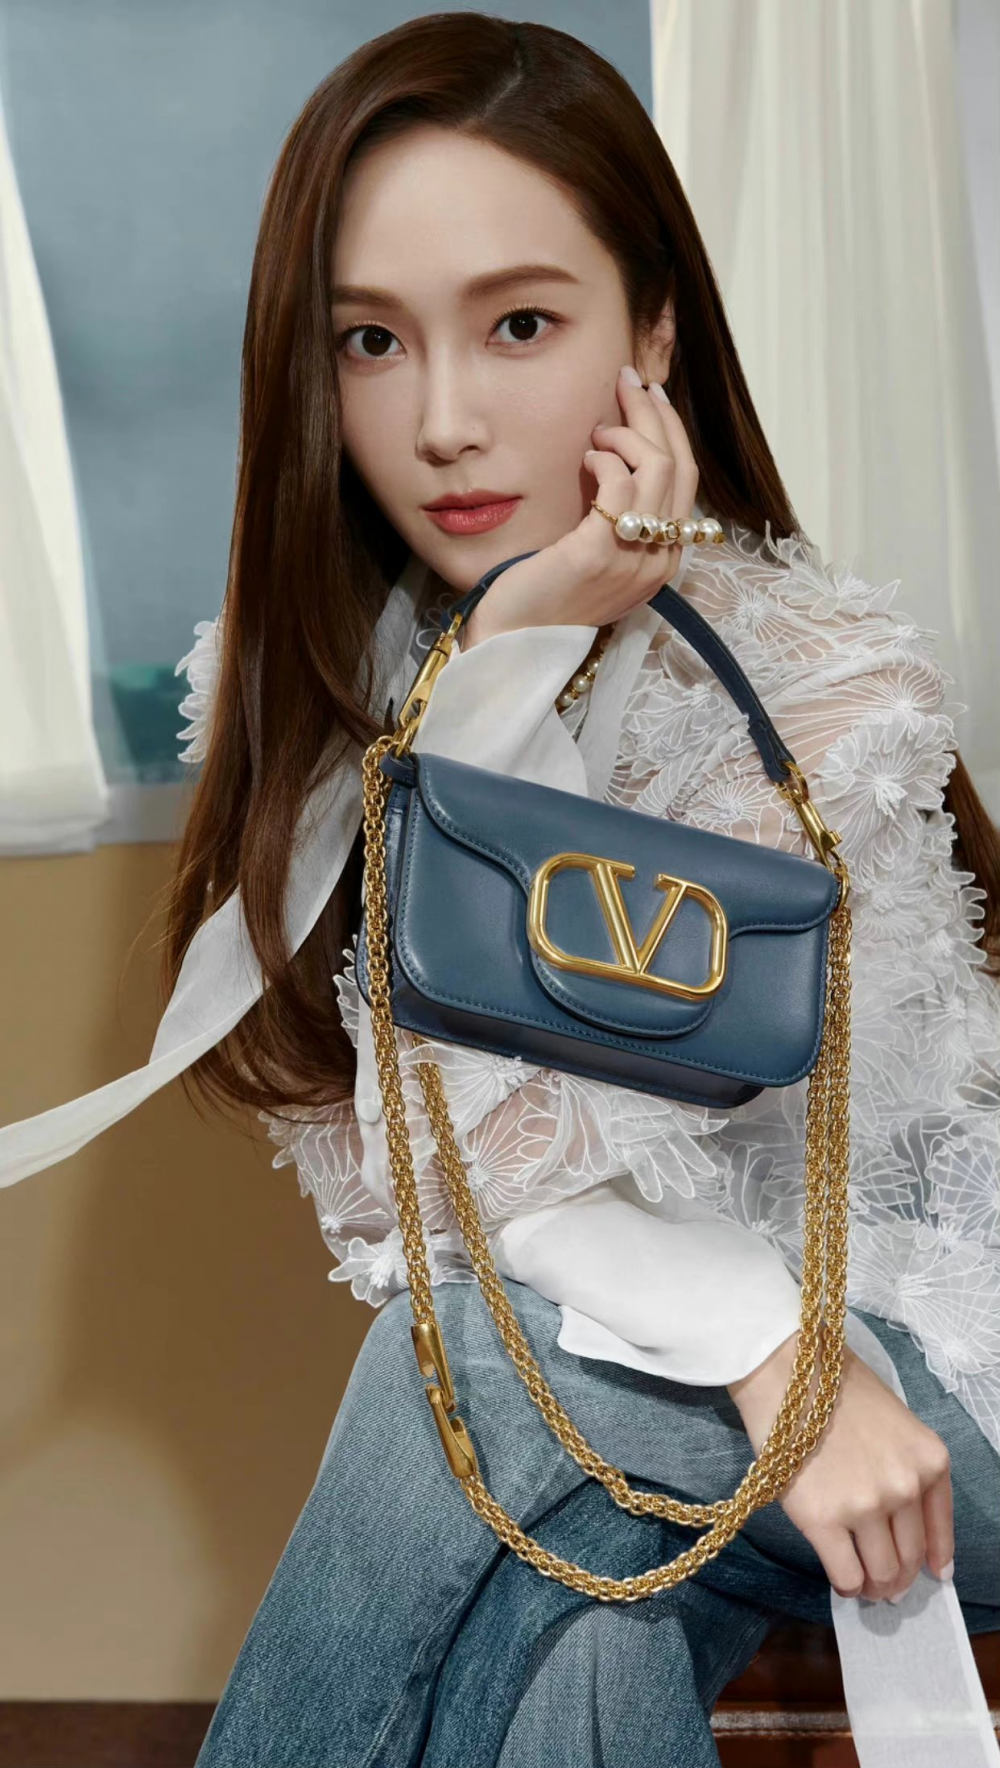 Jessica Jung and Lay pose together in a new pictorial for Valentino's mini loco  bag